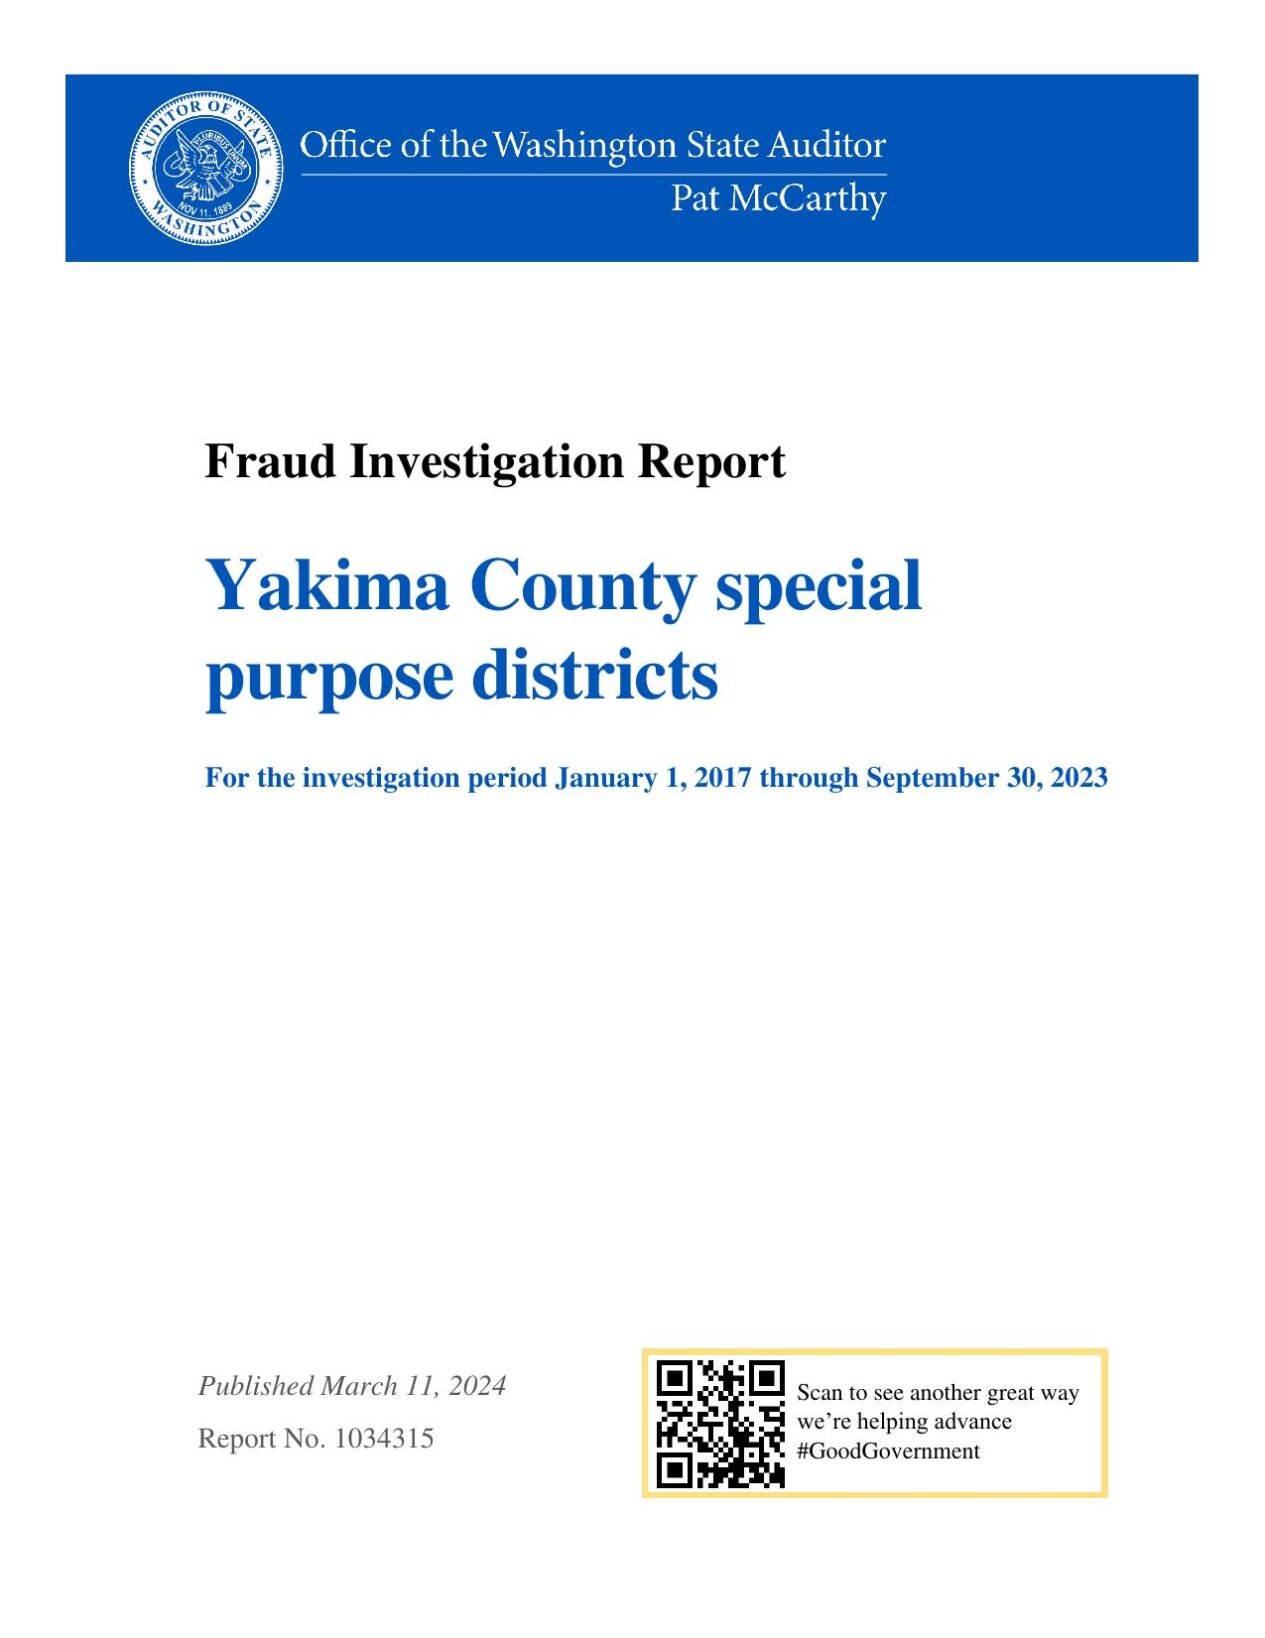 State audit report